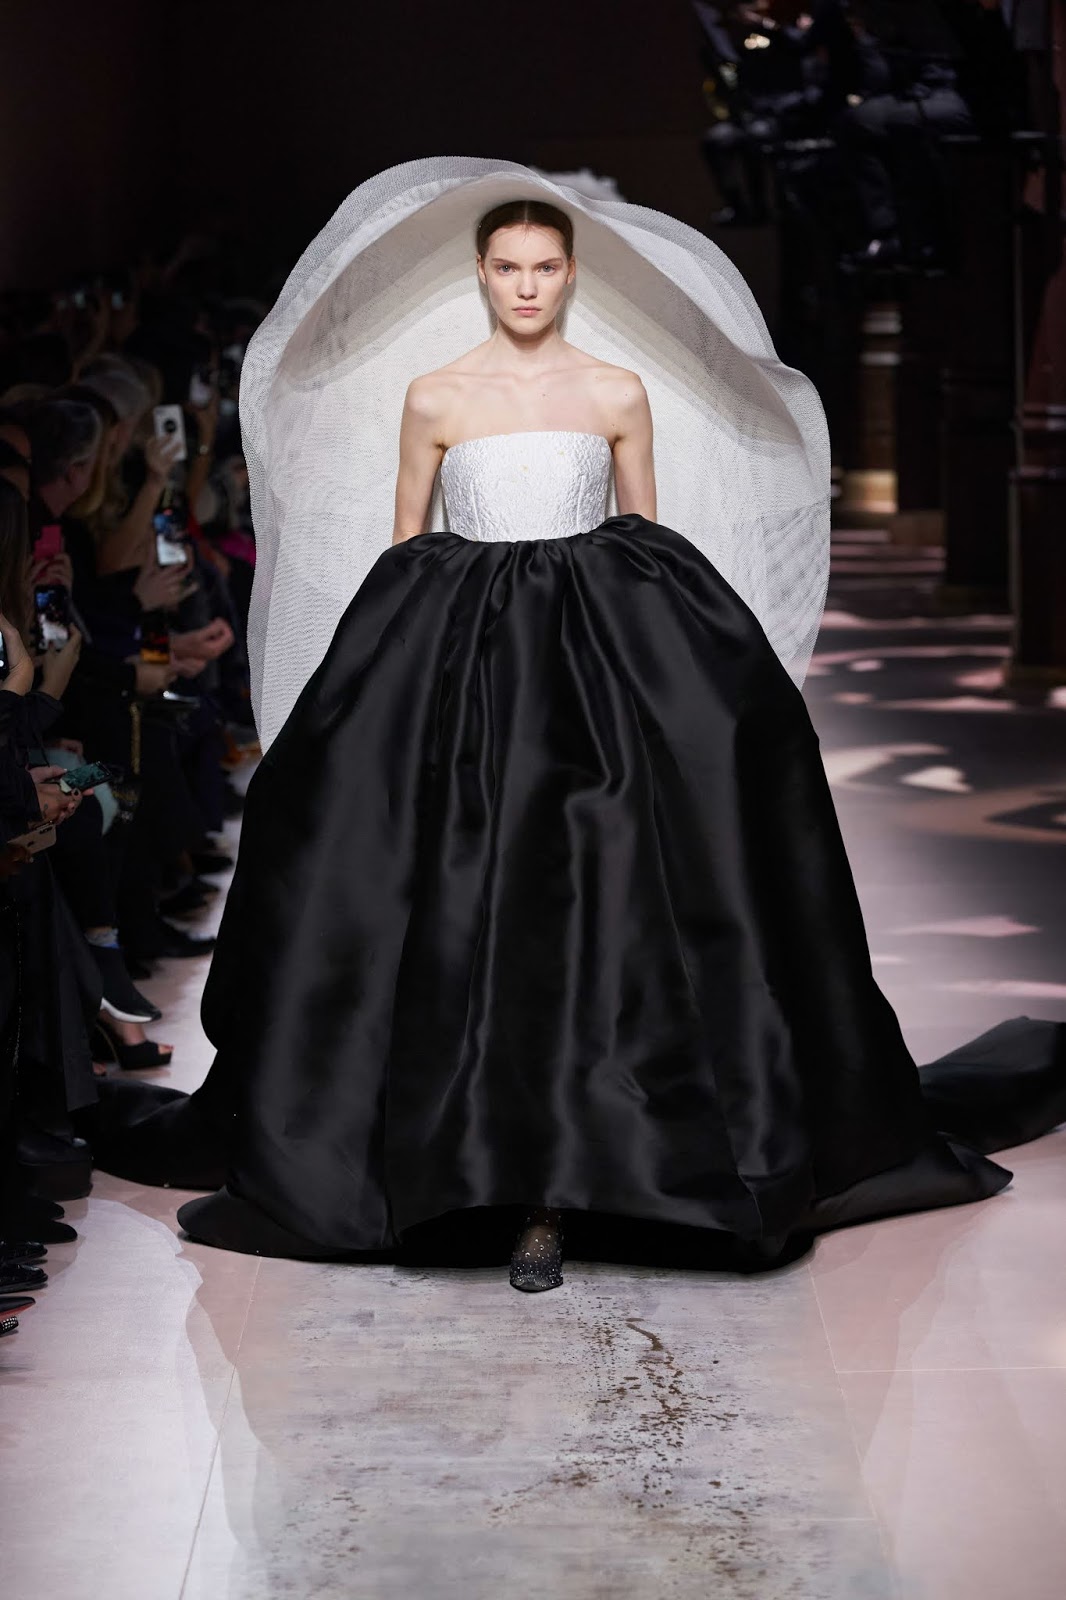 GIVENCHY: Couture Glamour February 24, 2020 | ZsaZsa Bellagio - Like No ...